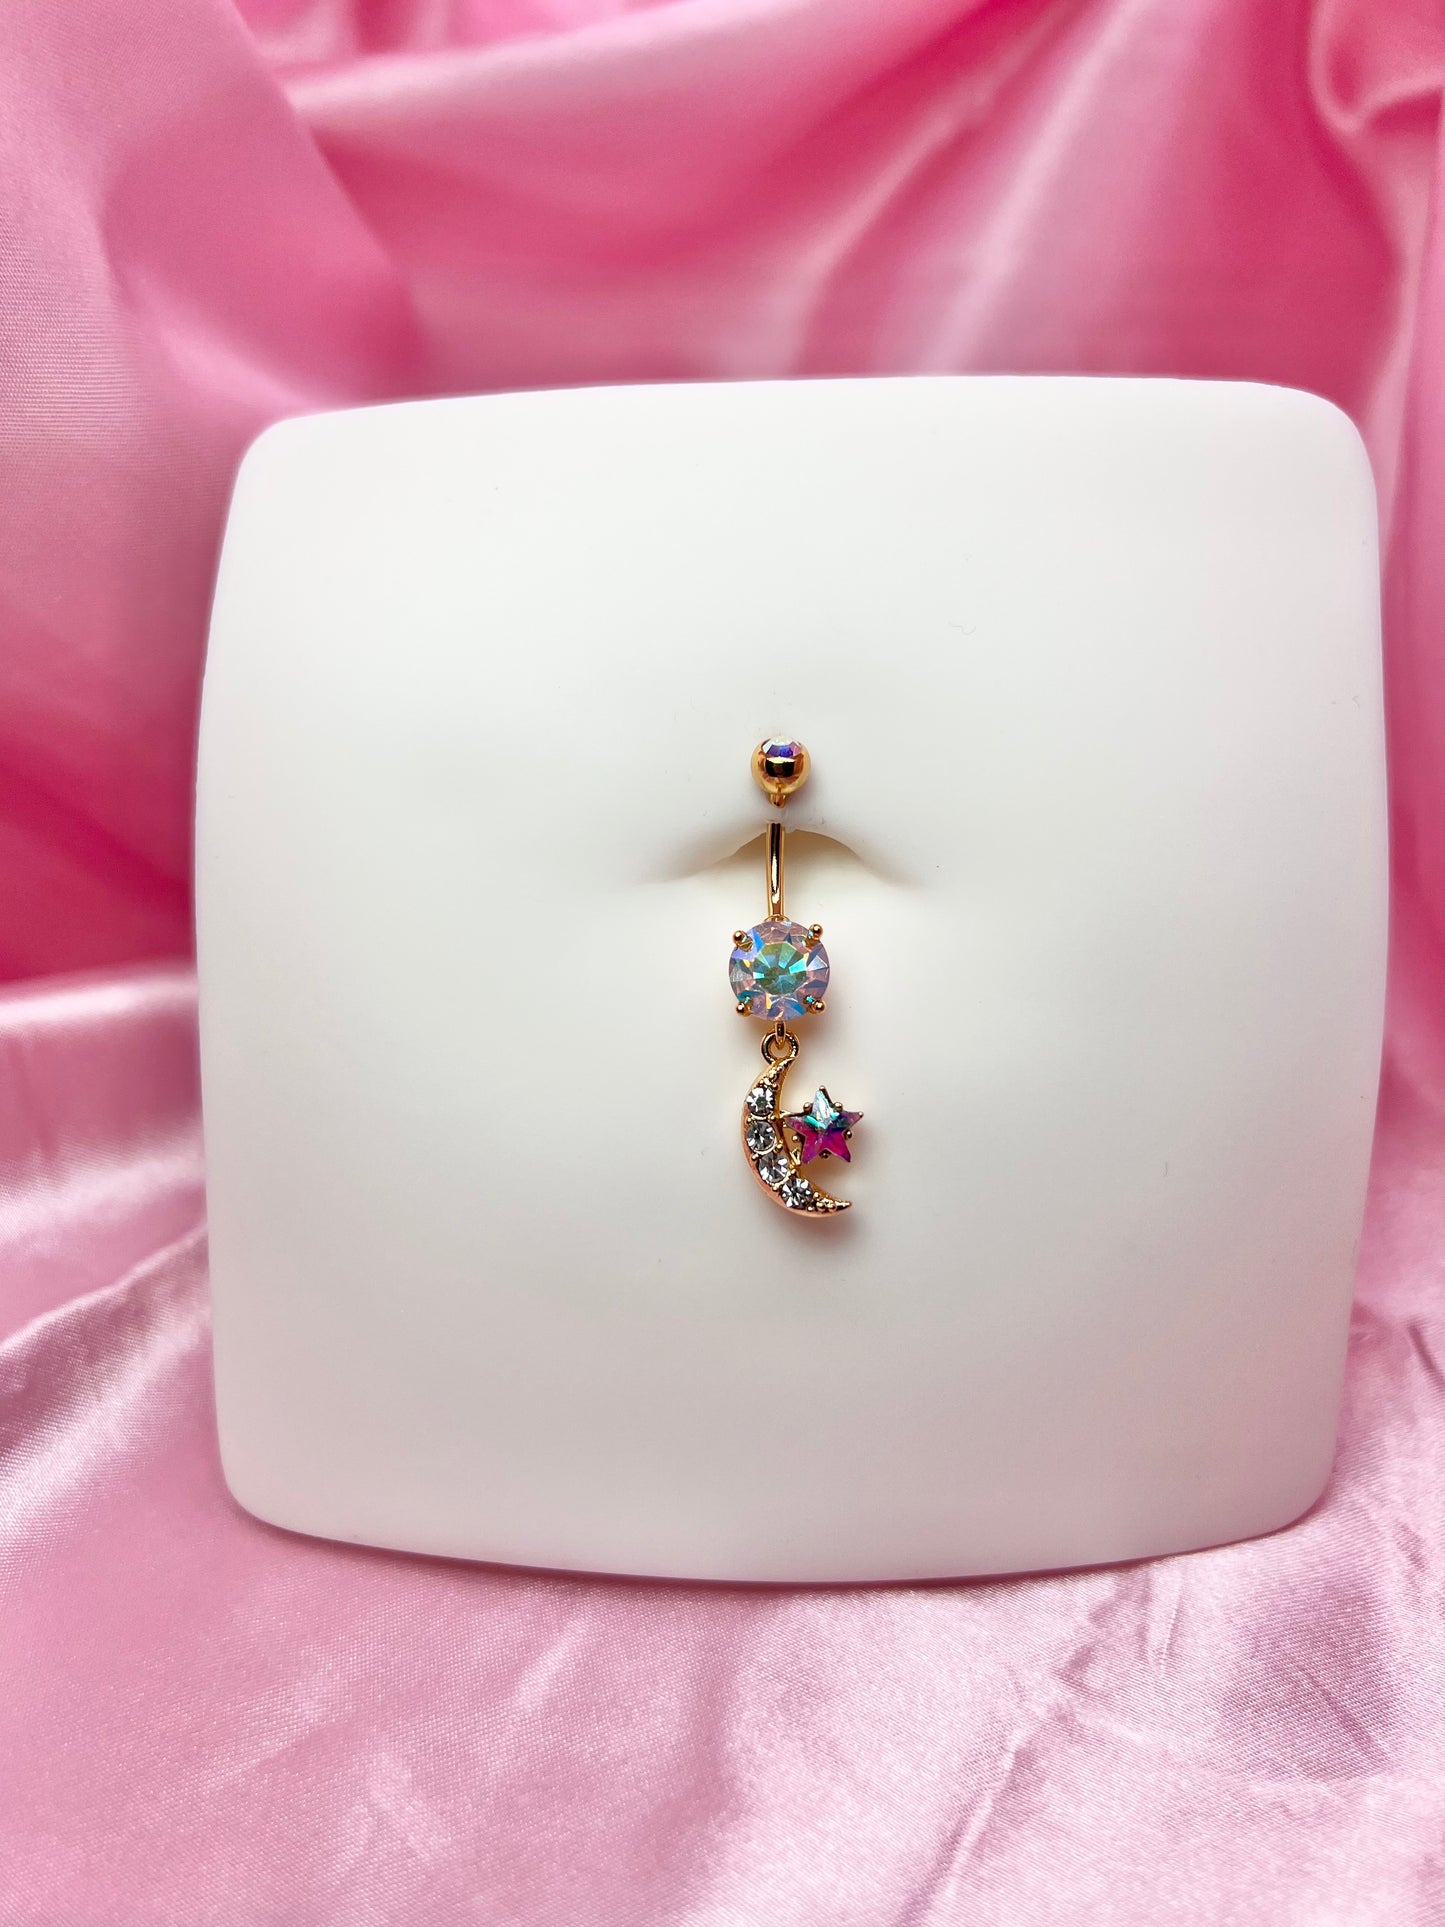 Icy sailor moon belly ring